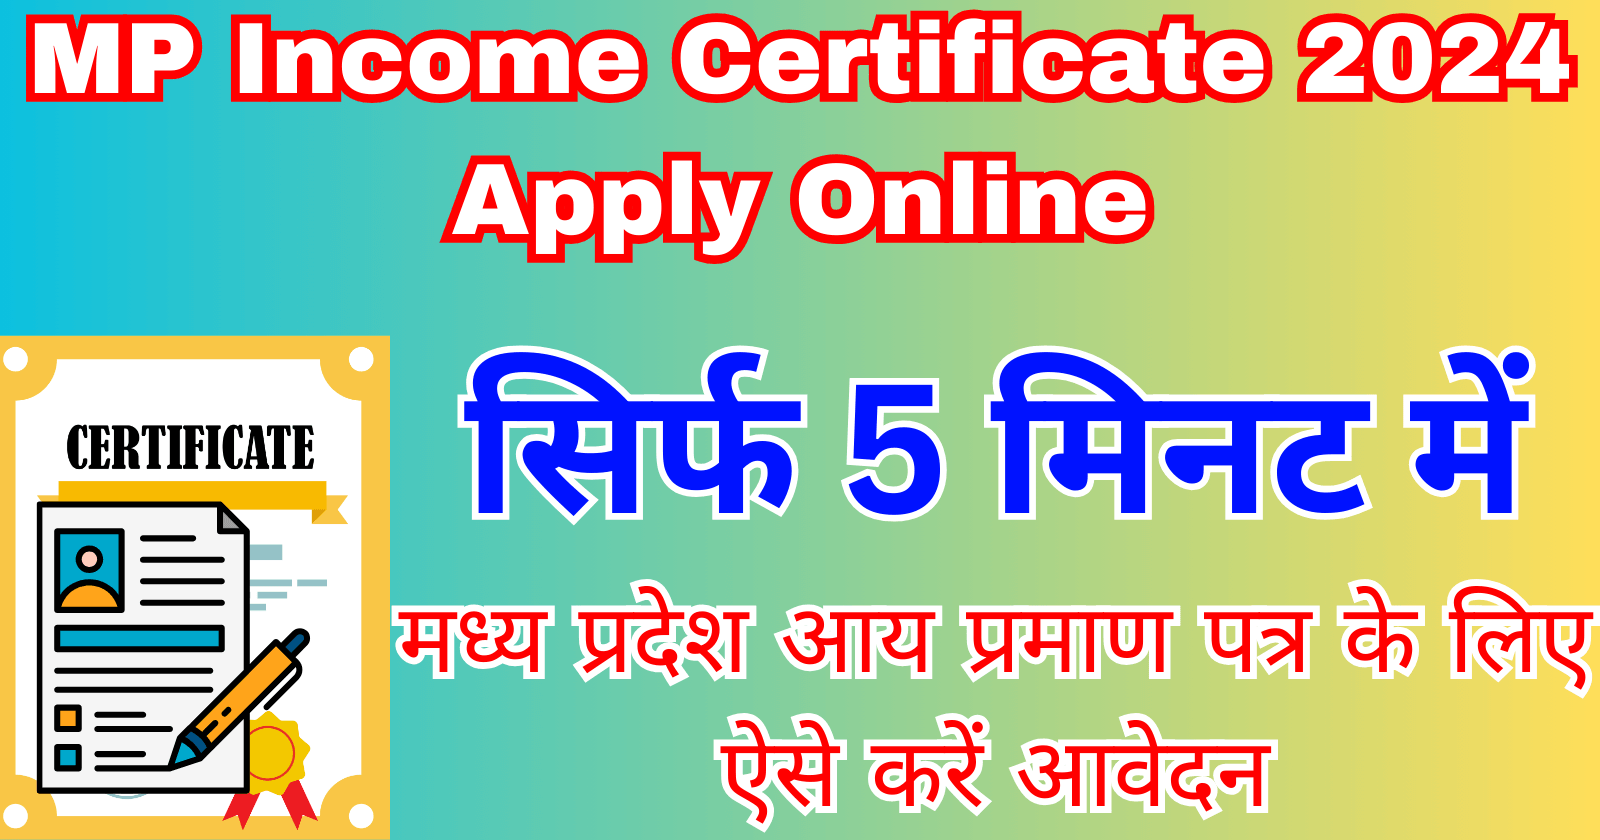 MP Income Certificate 2024 Apply Online